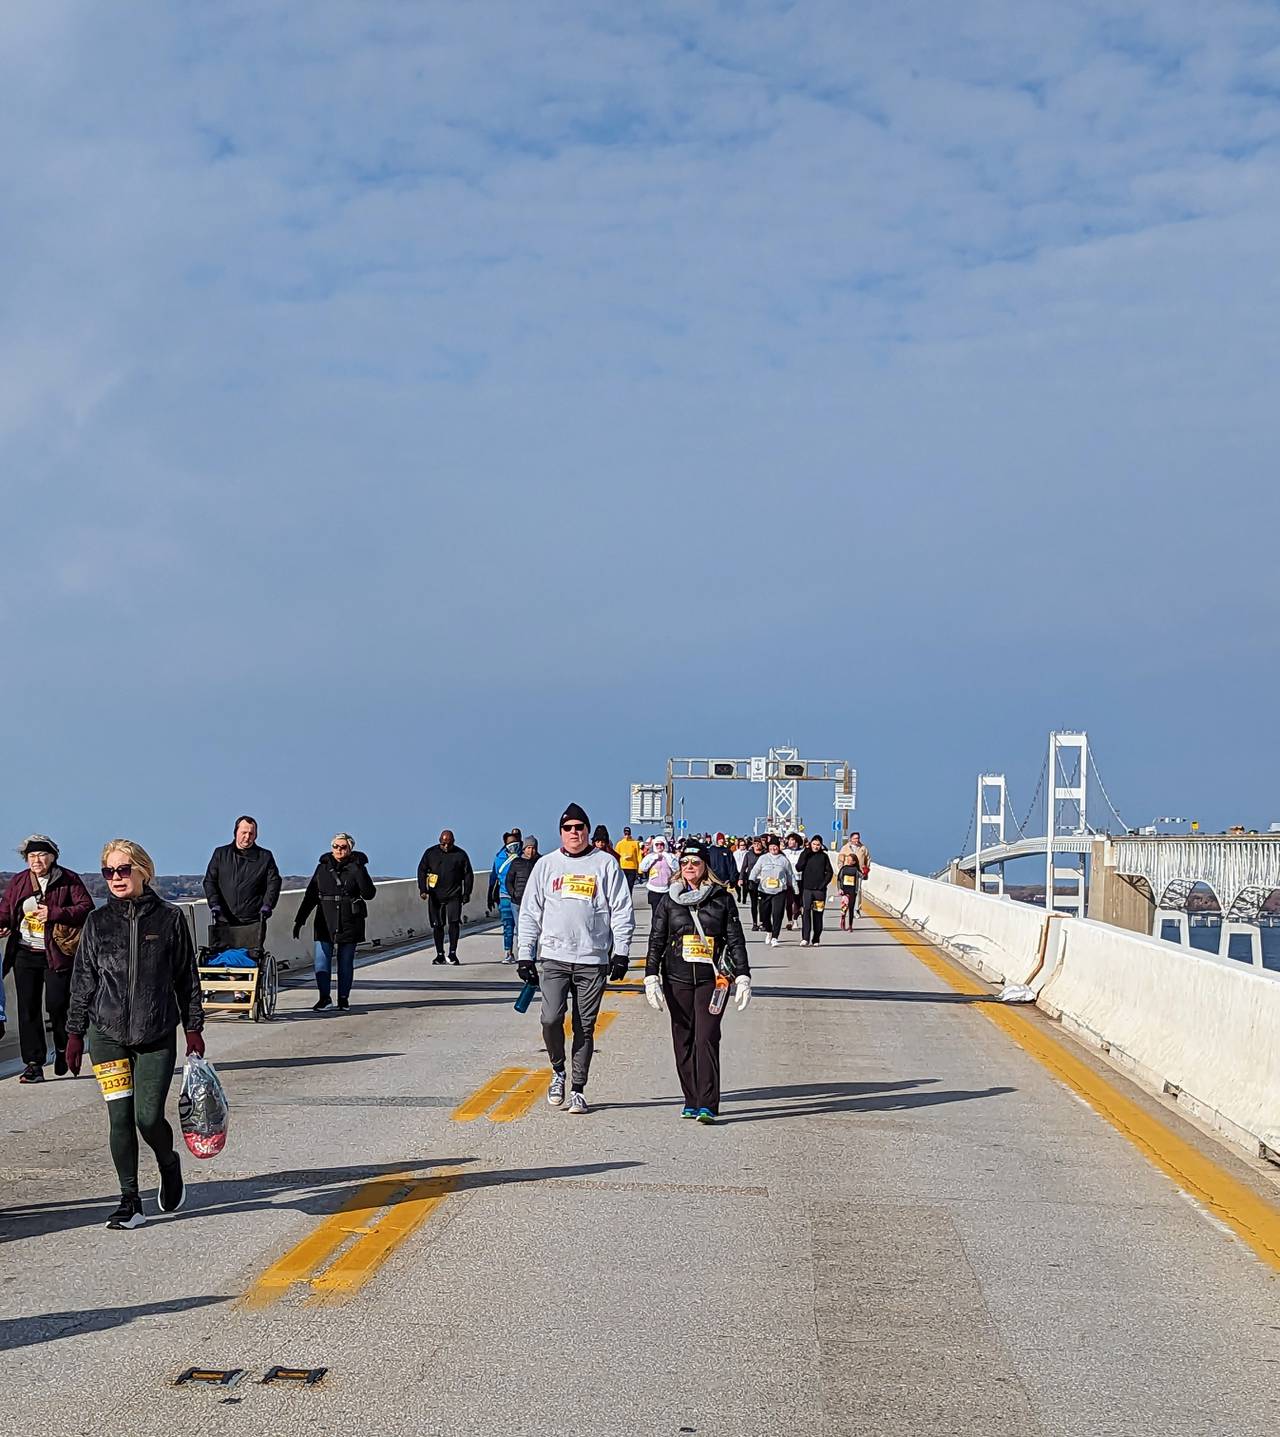 The Bay Bridge Run might be a 10K, with serious competitors completing the crossing in under an hour, but for most of the 18,000 participants, it was a walk across Maryland's most defining engineering feat.